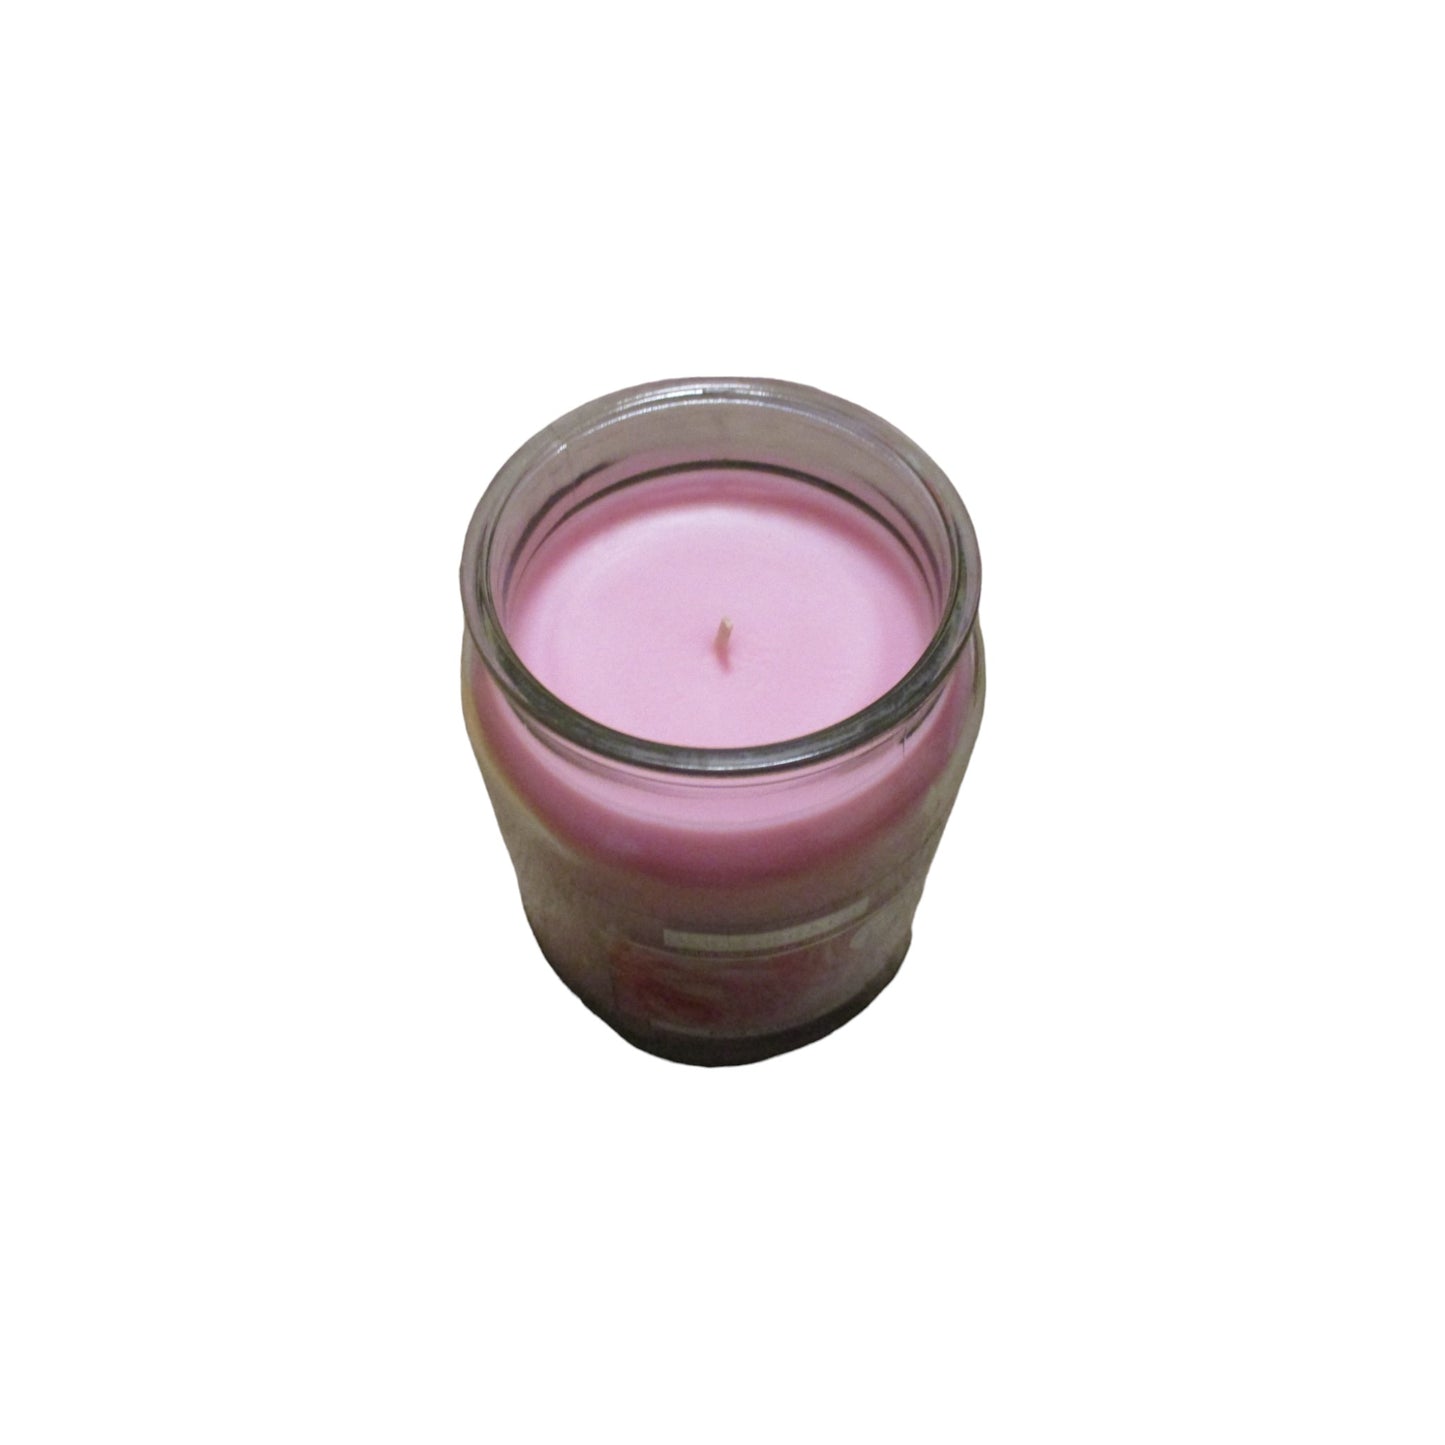 Luxury Scented Candle - (ROSE GARDEN) - (By Wickford & Co)